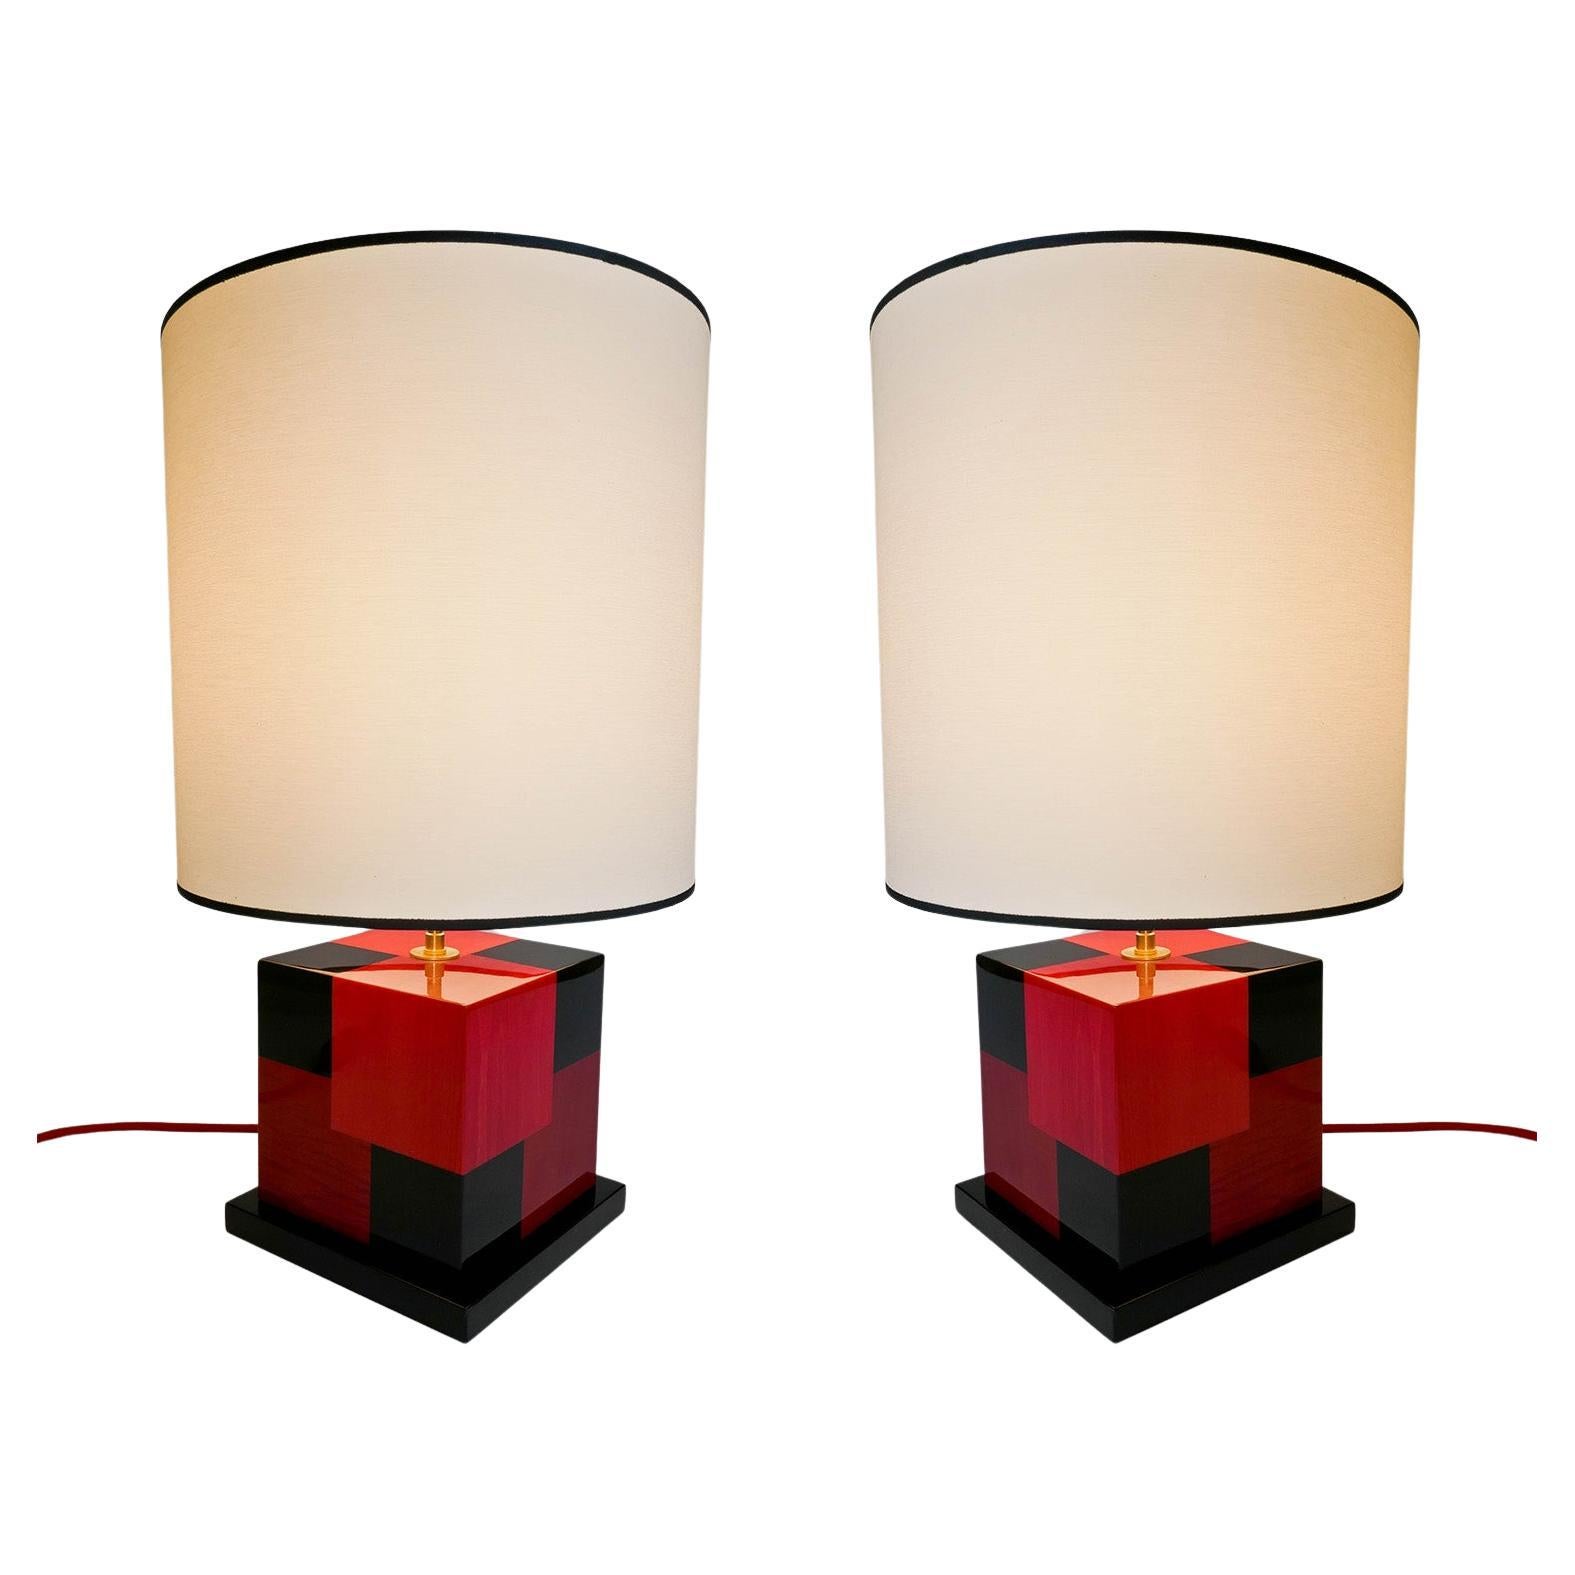 Pair of Table Lamps "Cubes" in Tinted Red and Black Marquetery by Aymeric Lefort For Sale